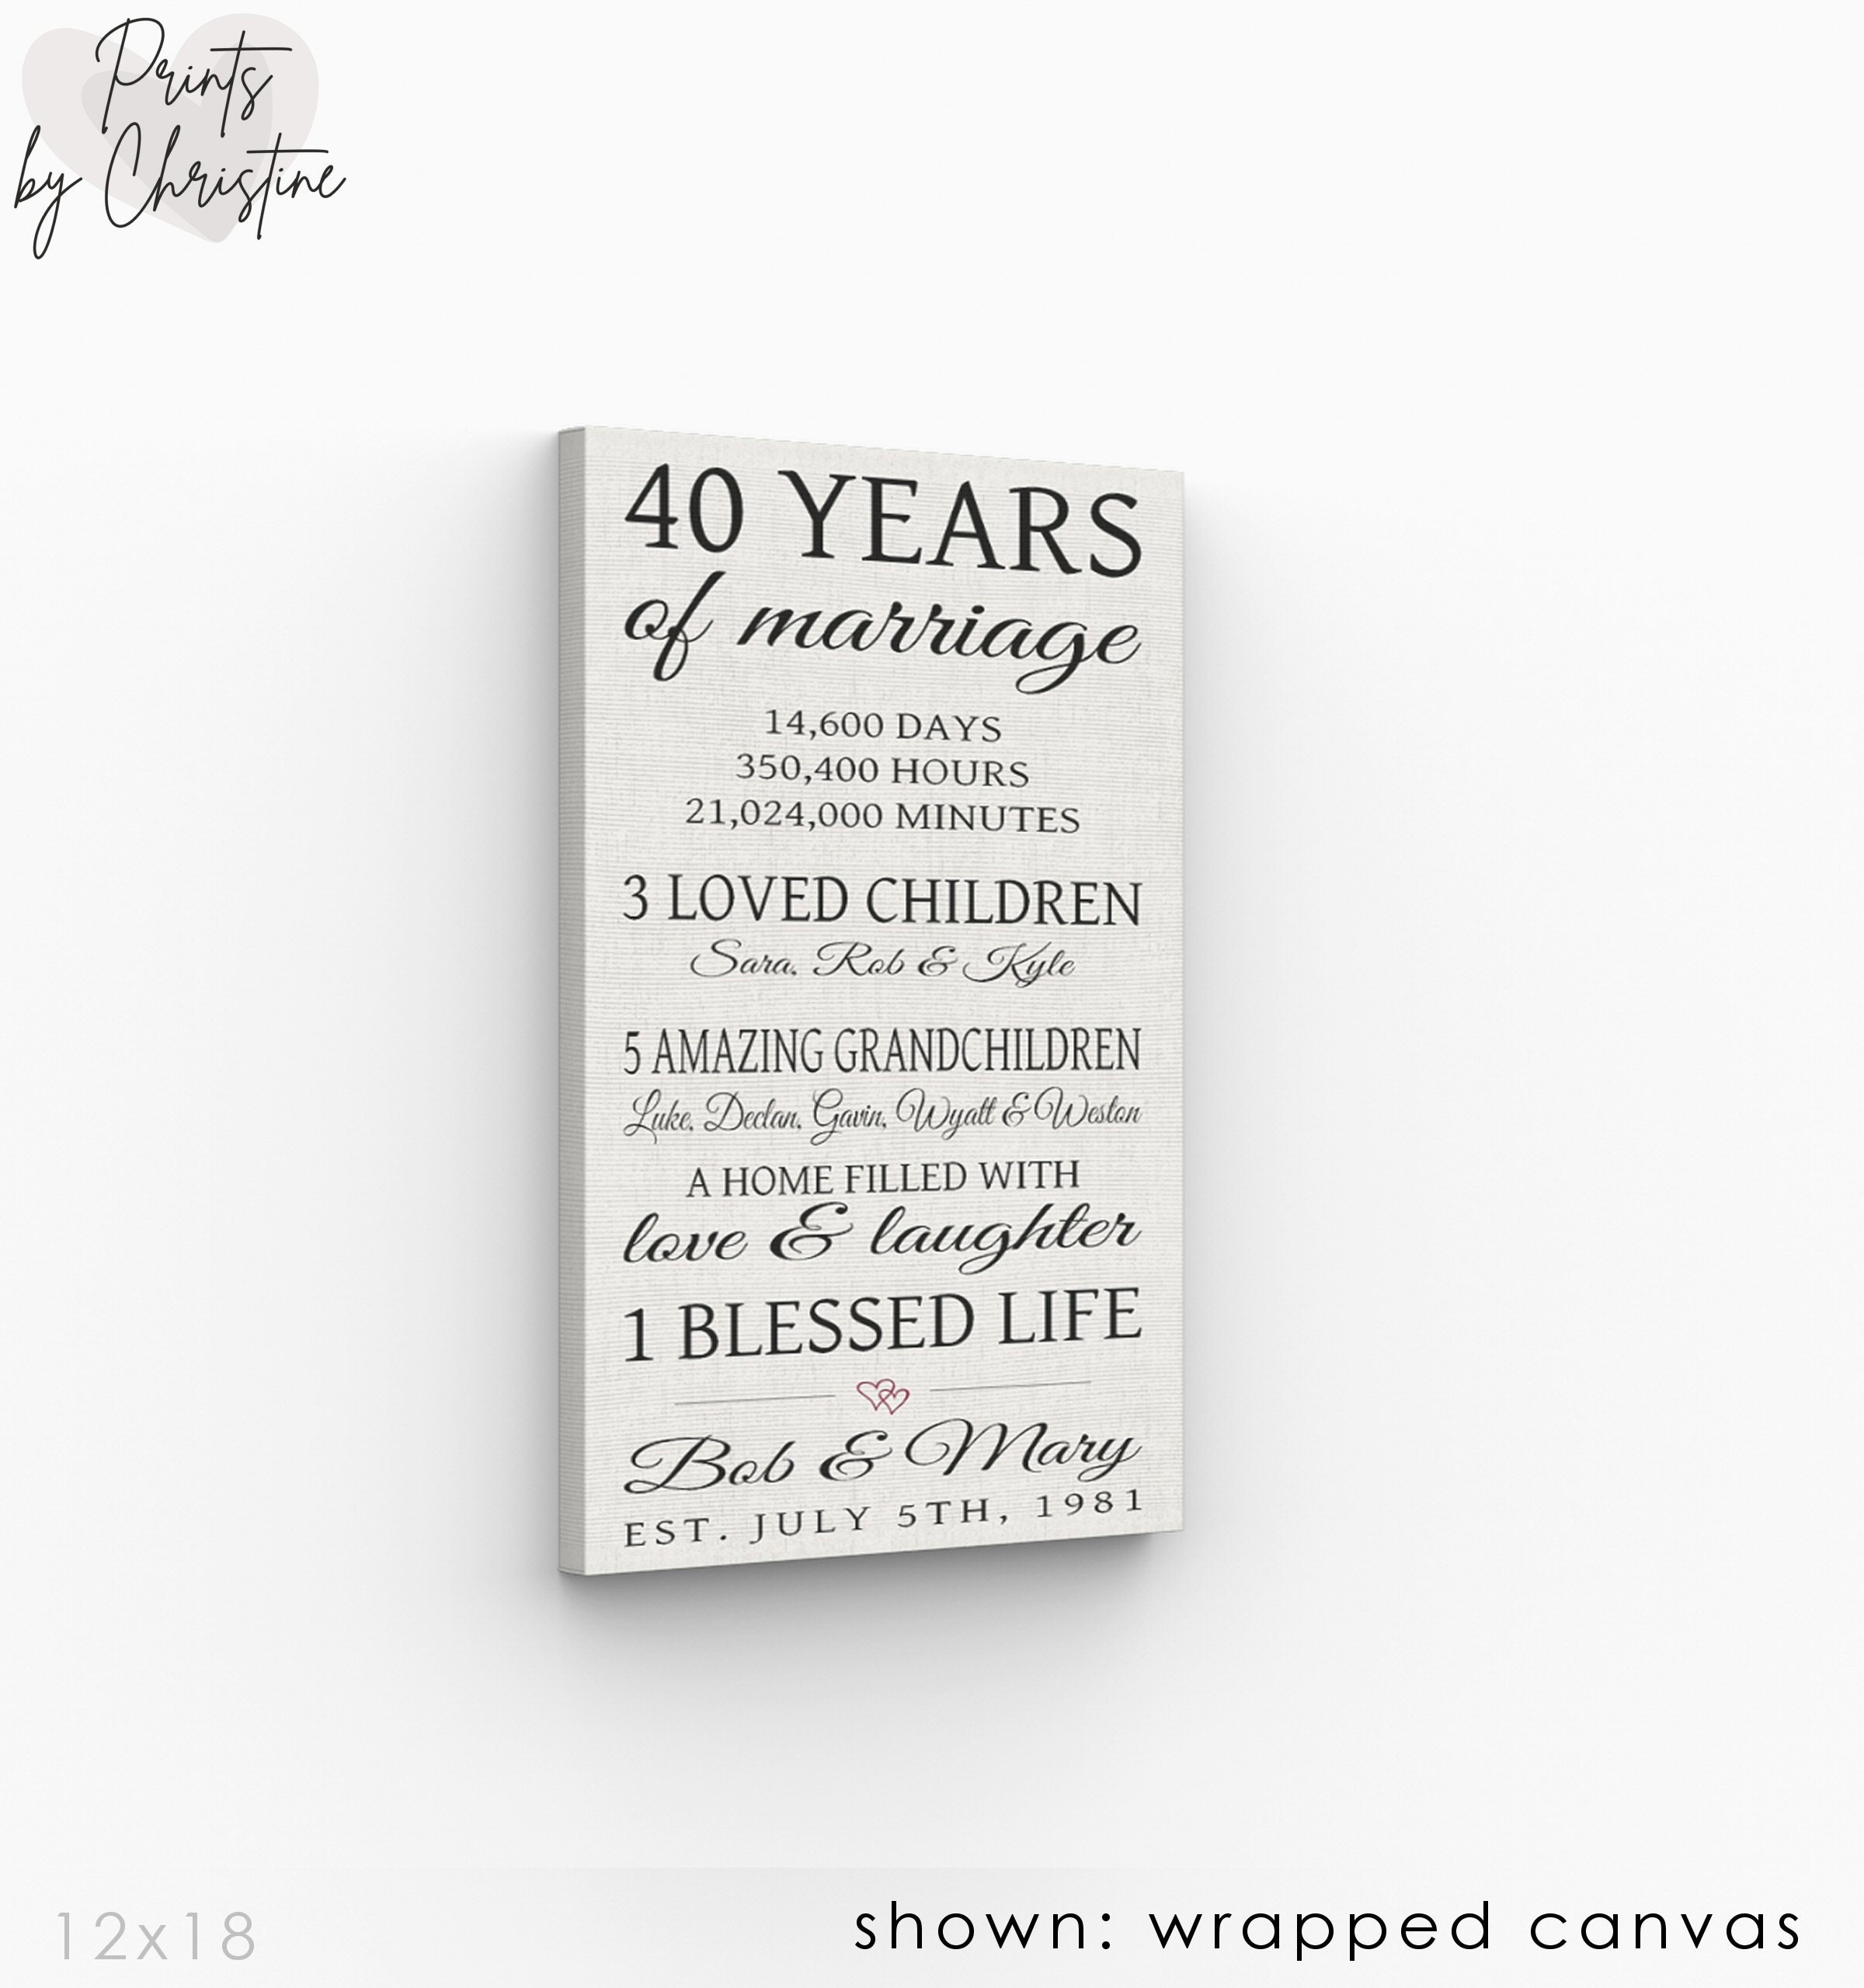 40th Wedding Anniversary Gift For Parents Personalized Anniversary Gifts  For Couples - Oh Canvas